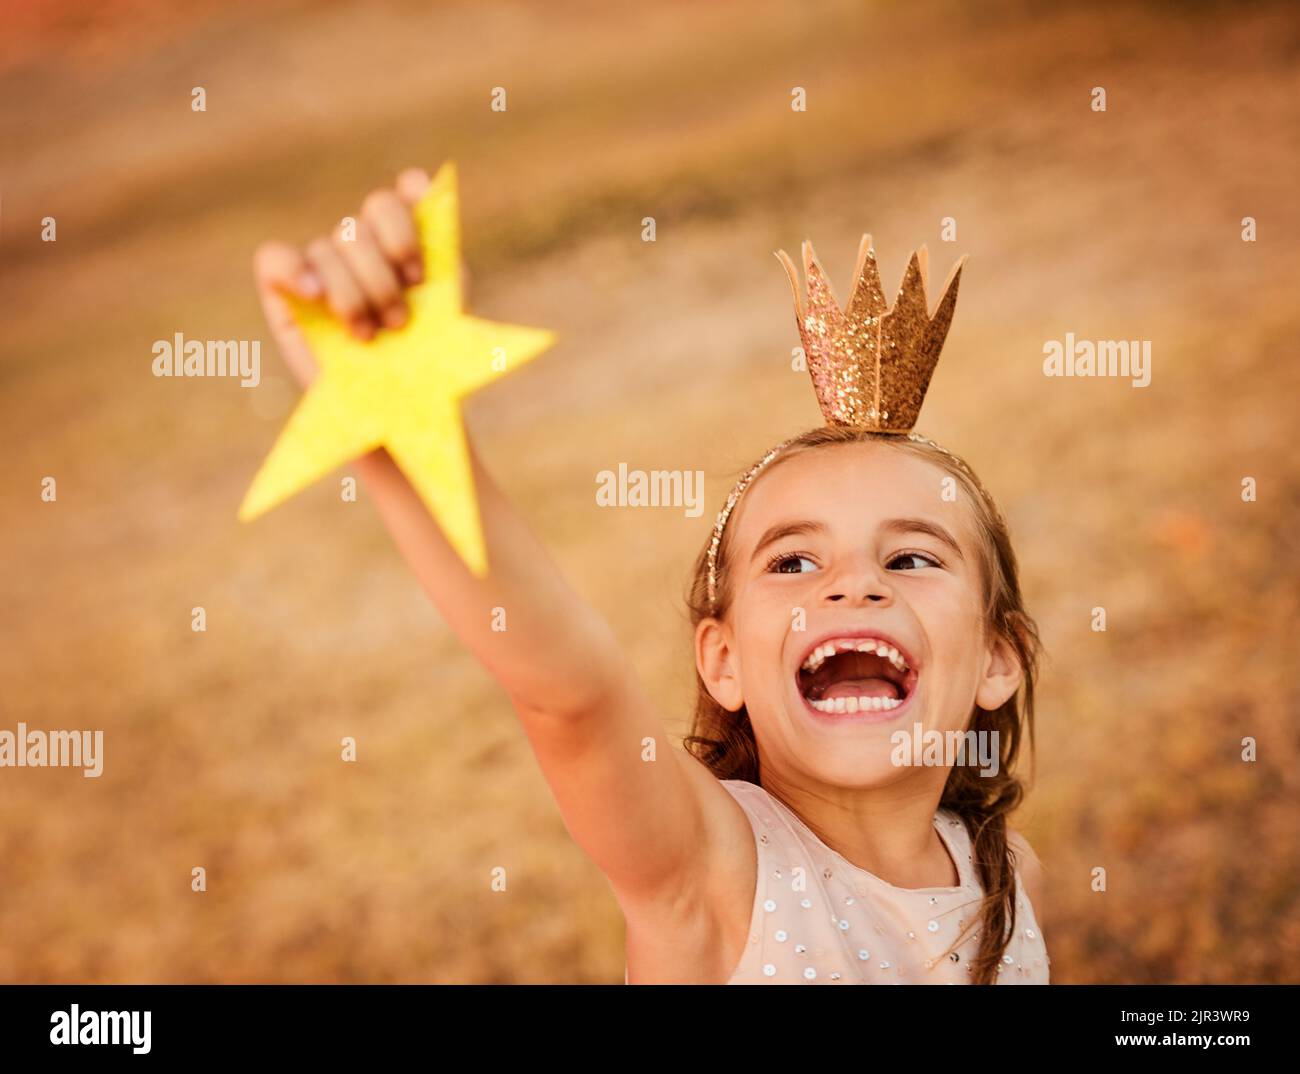 Here you go sky you can have your star back. an adorable little girl playing outdoors. Stock Photo